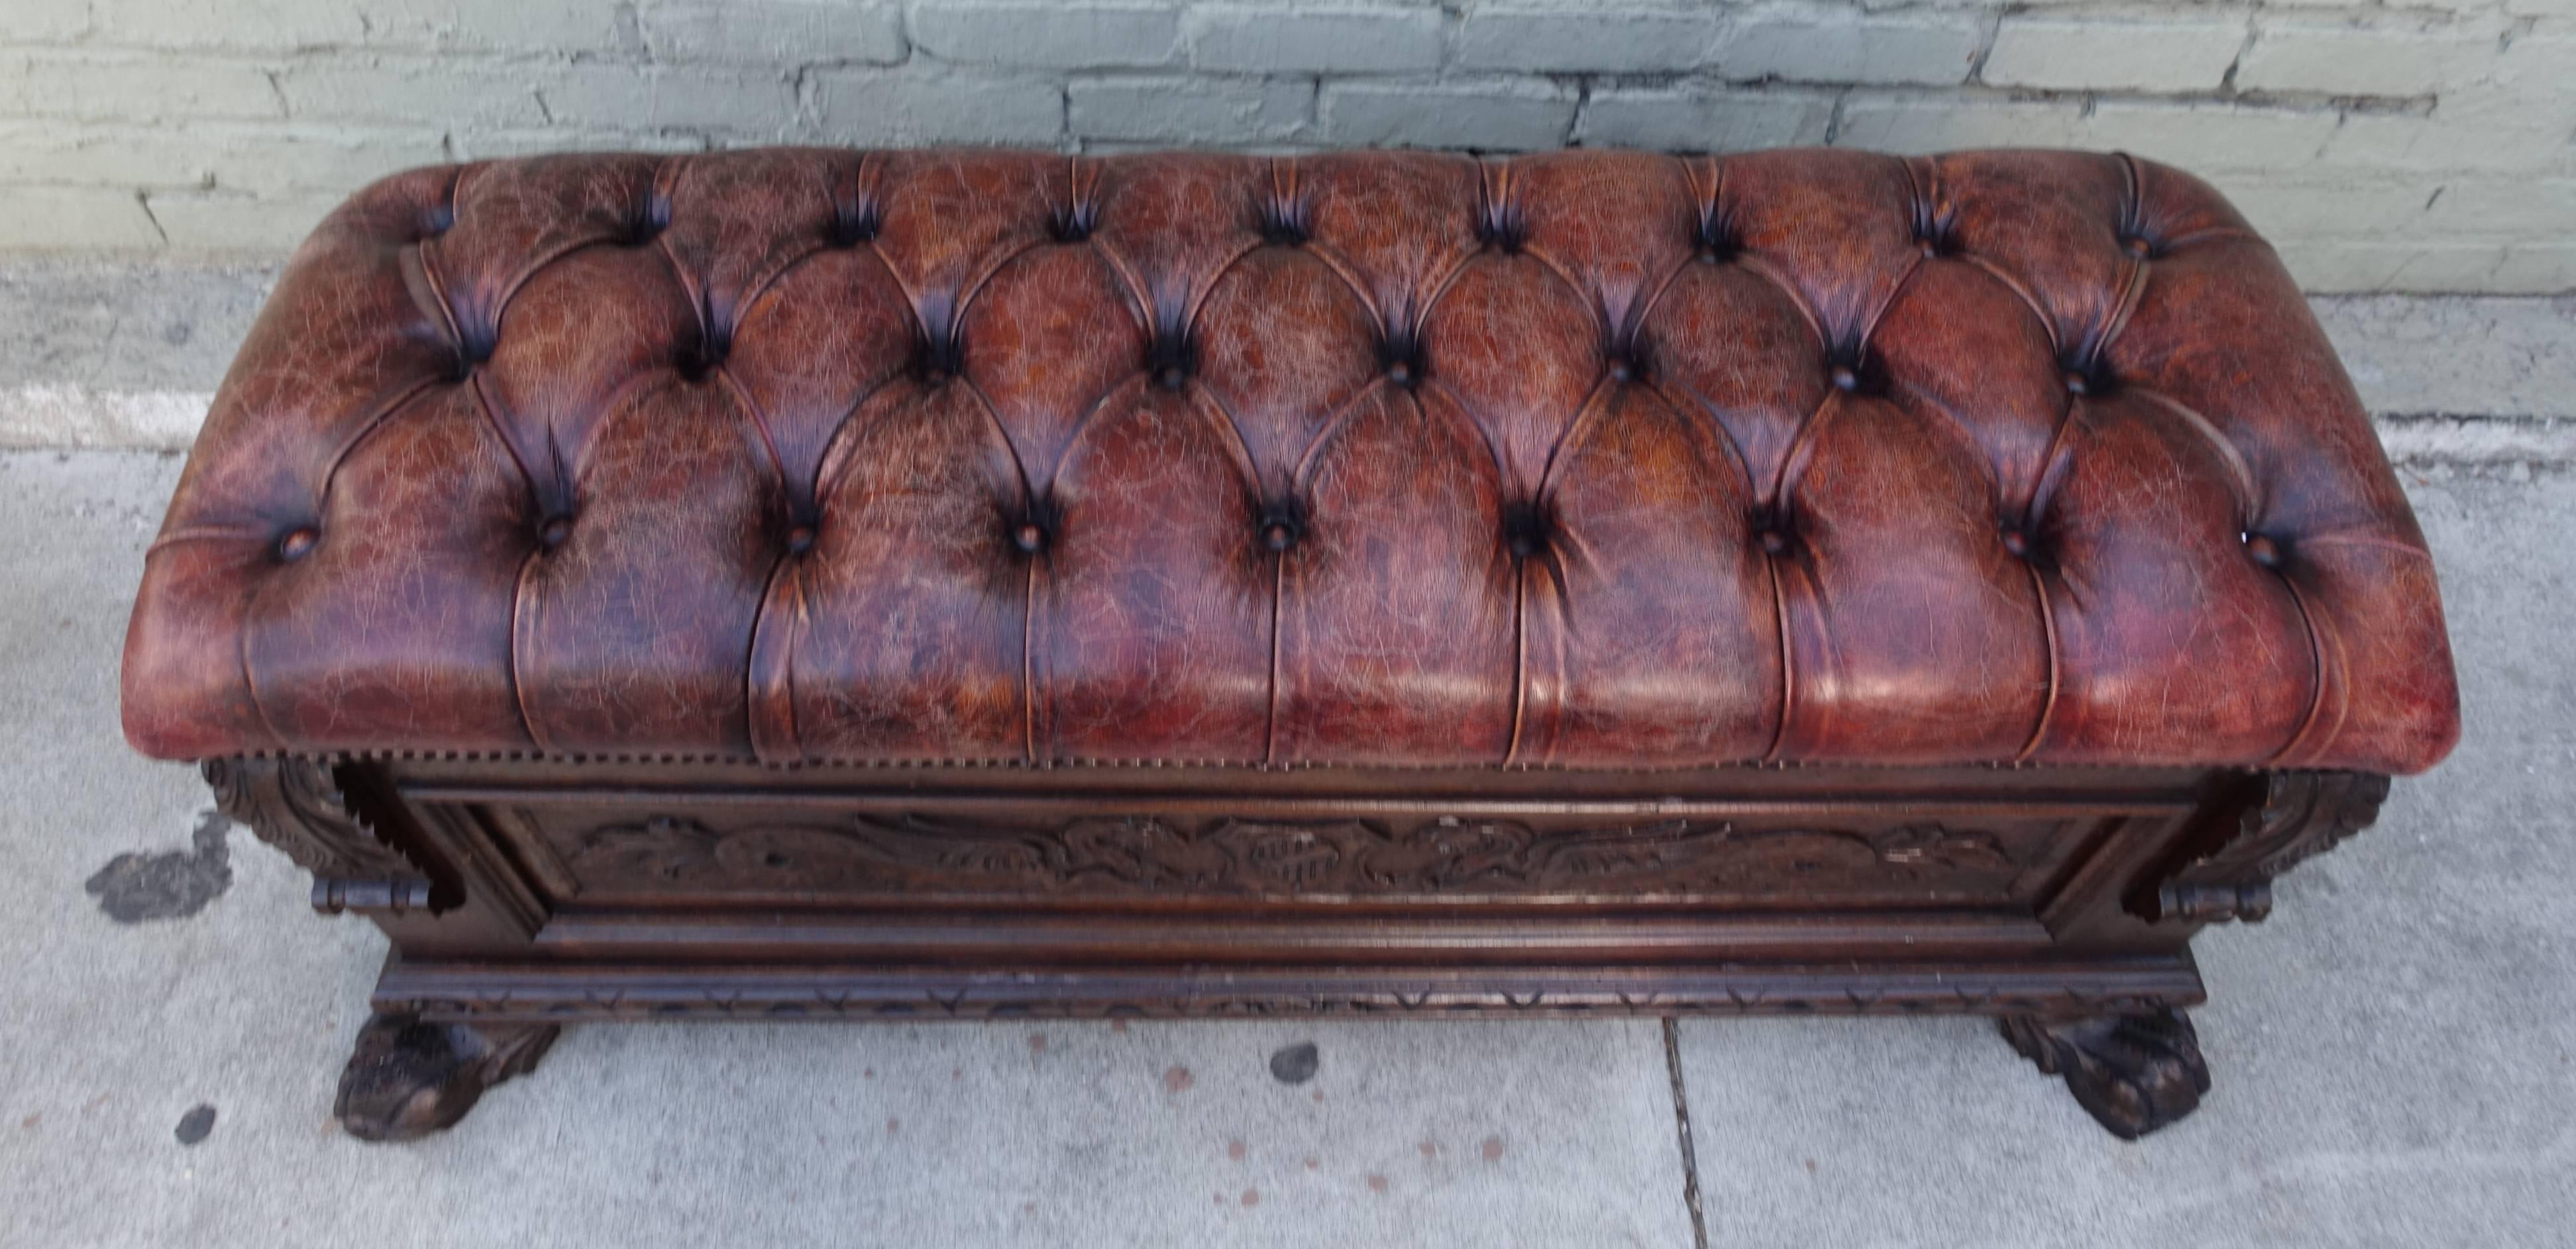 19th century Italian Renaissance style walnut cassone with a tufted leather top and nail head trim detail. The cassone is decorated with beautiful egg and dart carving and acanthus leaves along with a pair of griffins facing each other and a pair of